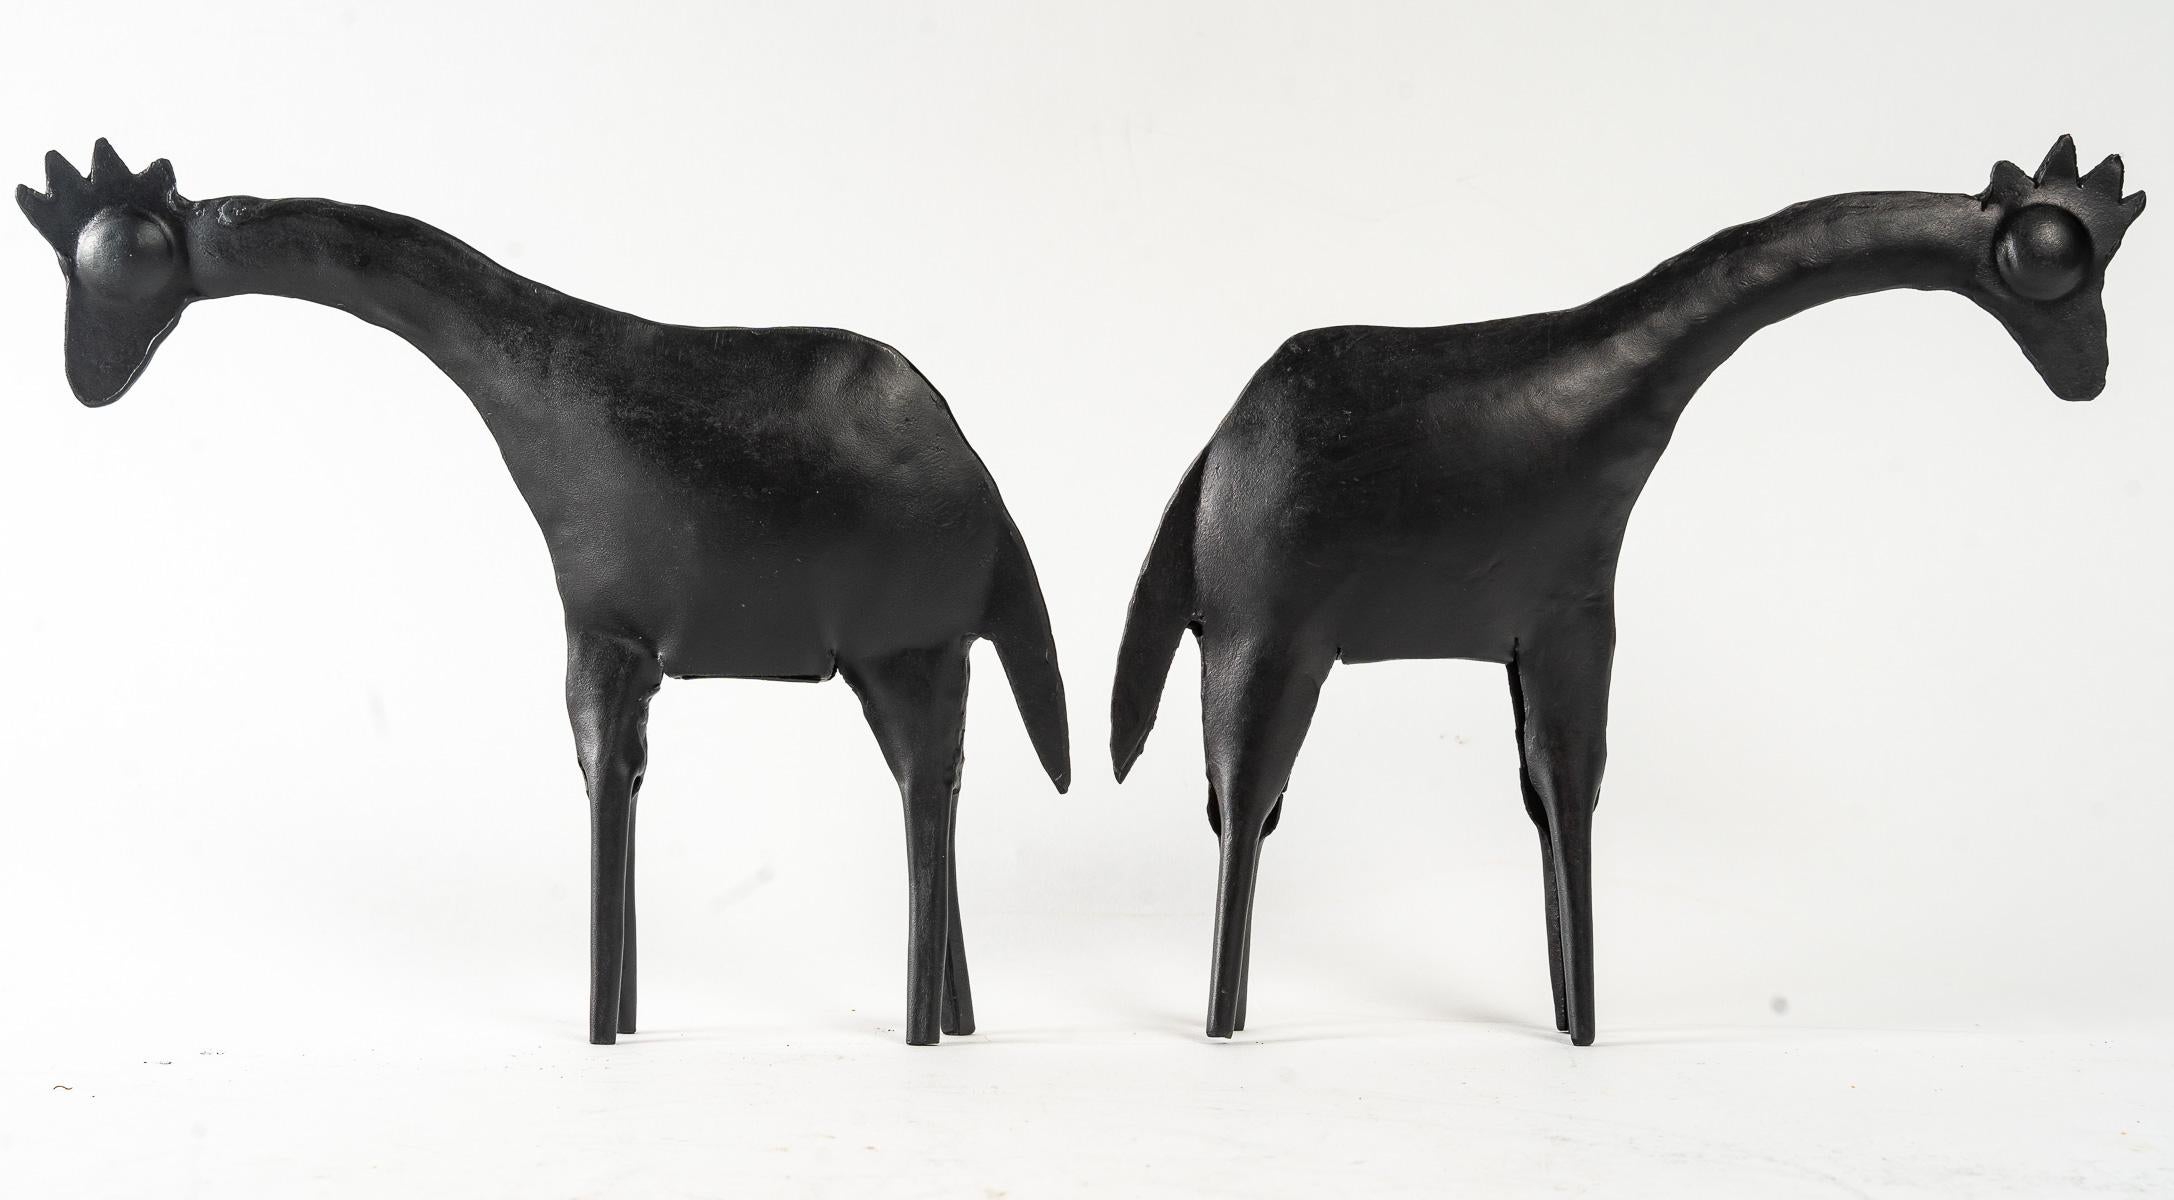 These stylized giraffes are made from two pieces of sheet metal, hand-worked and lightly hammered together to a fine, delicate finish.
They stand on 4 tapering feet.
The work is akin to Brutalism, with the neck and head adorned with a mane and tail.